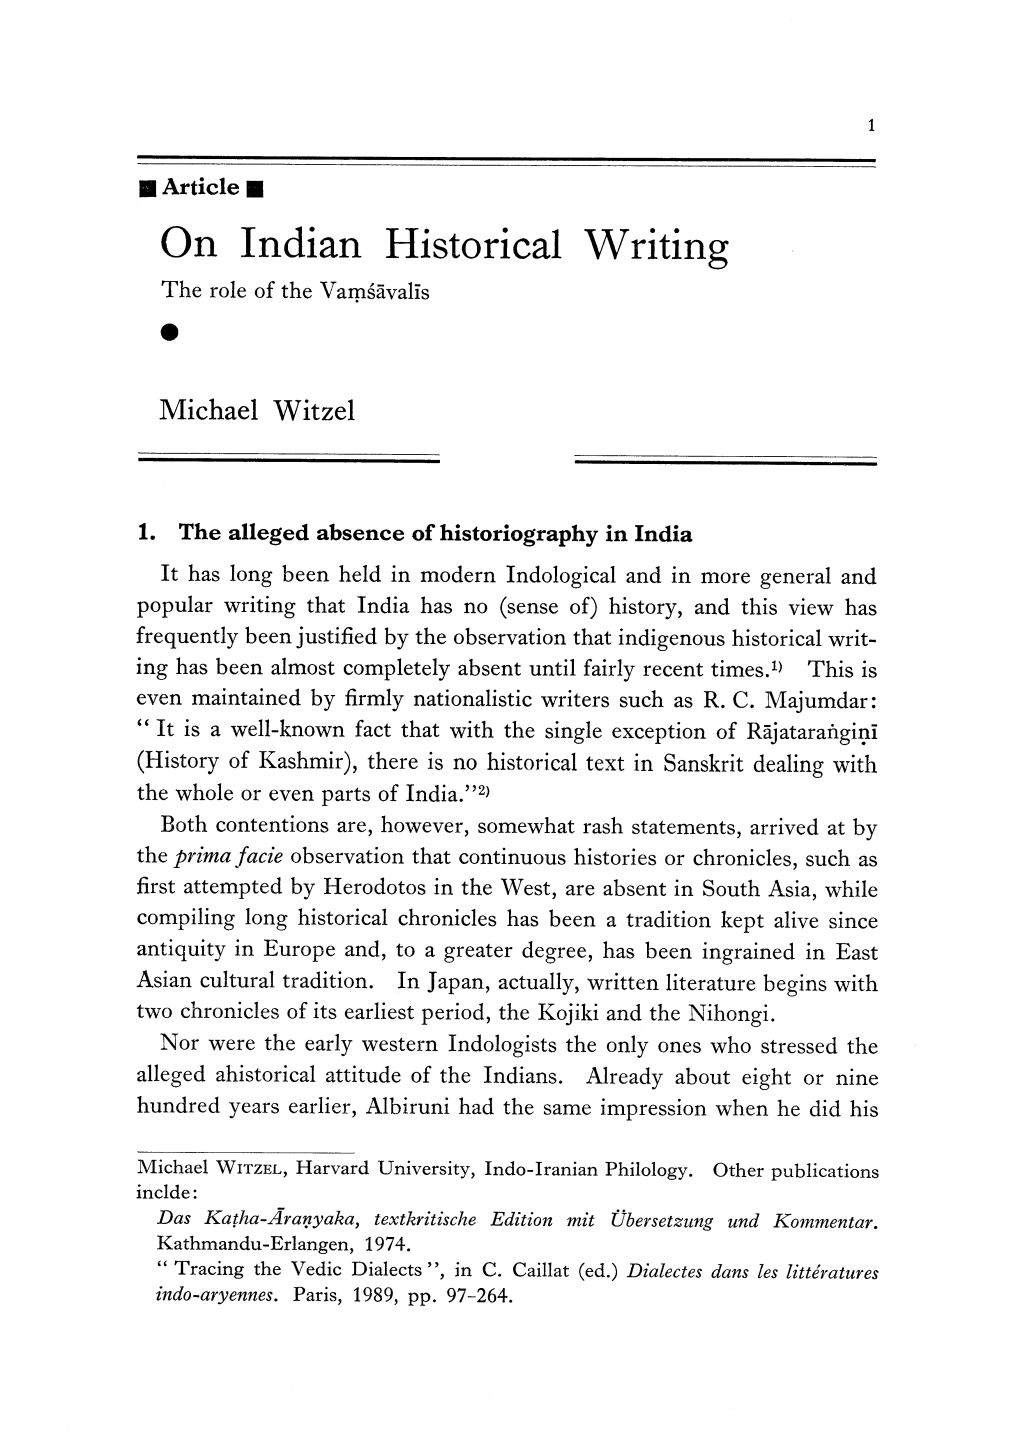 On Indian Historical Writing